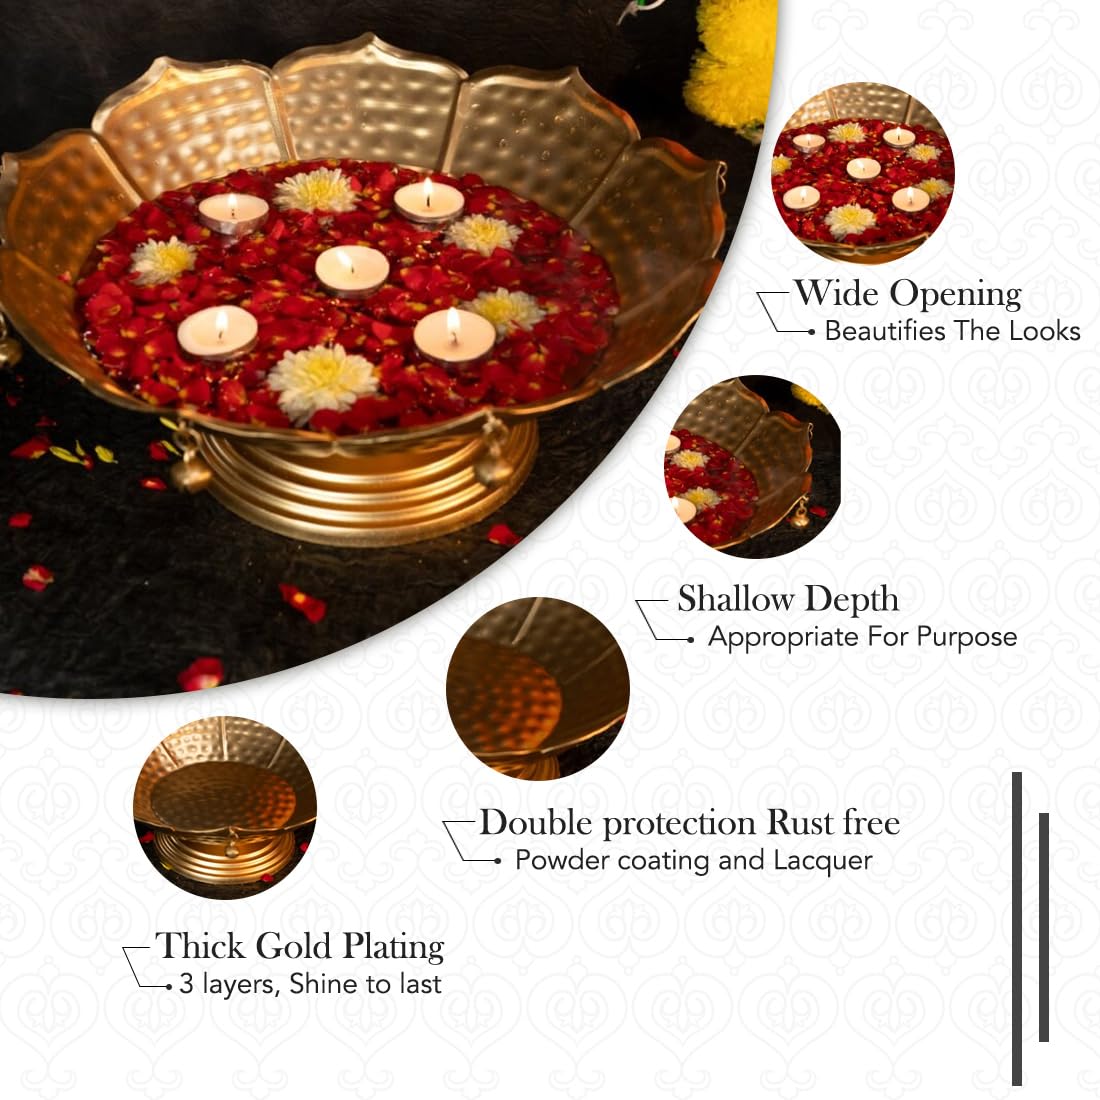 Ekhasa Urli Bowl for Home Decor & Table Decoration | Floating Flowers, Tealight Candles Water Bowl for Diwali Pooja and Other Festivals | Gift for House Warming Ceremony (Medium)